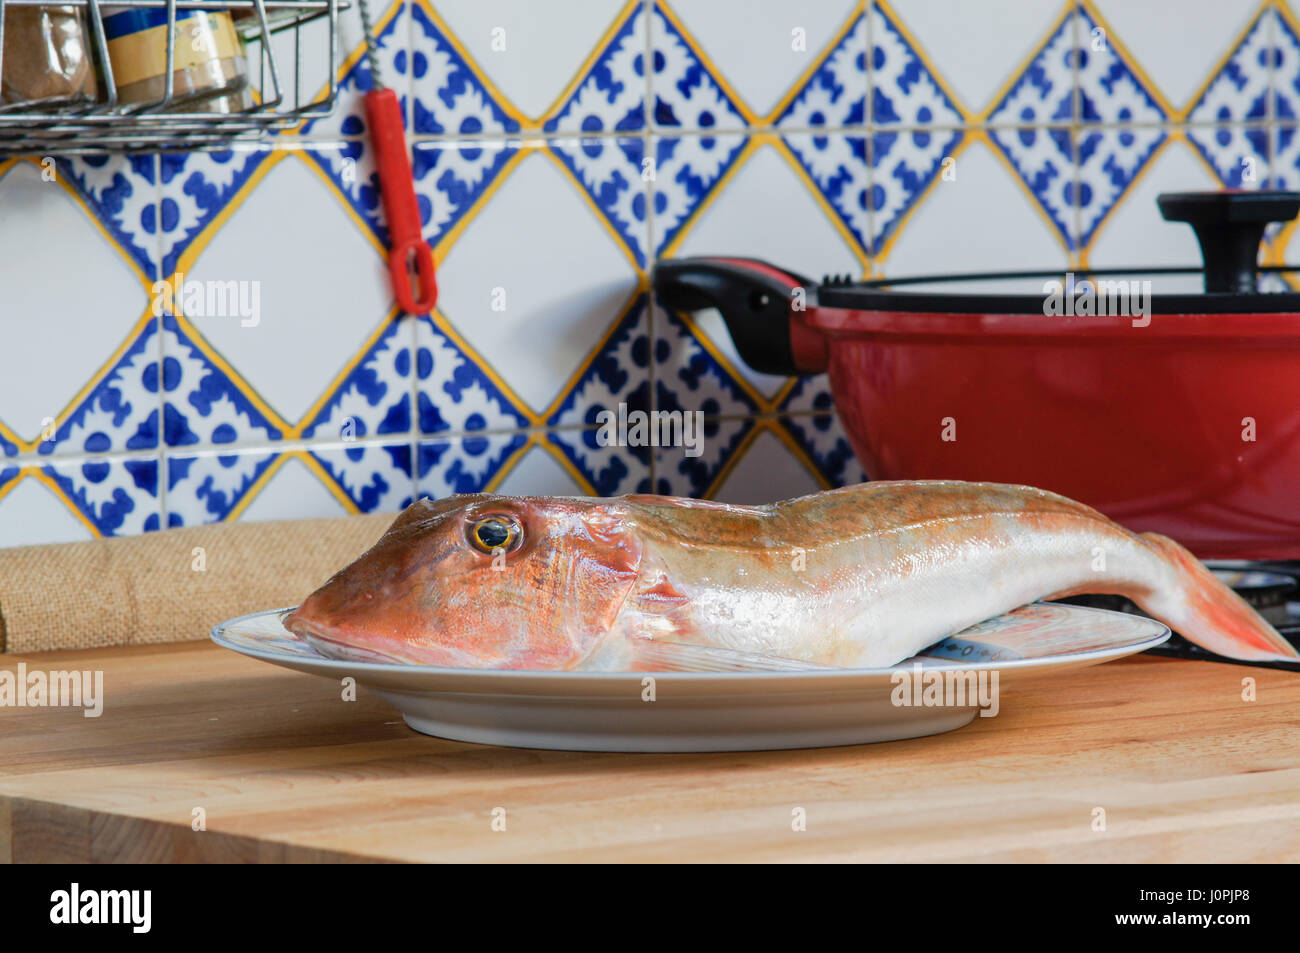 Fresh fish with red scales Stock Photo